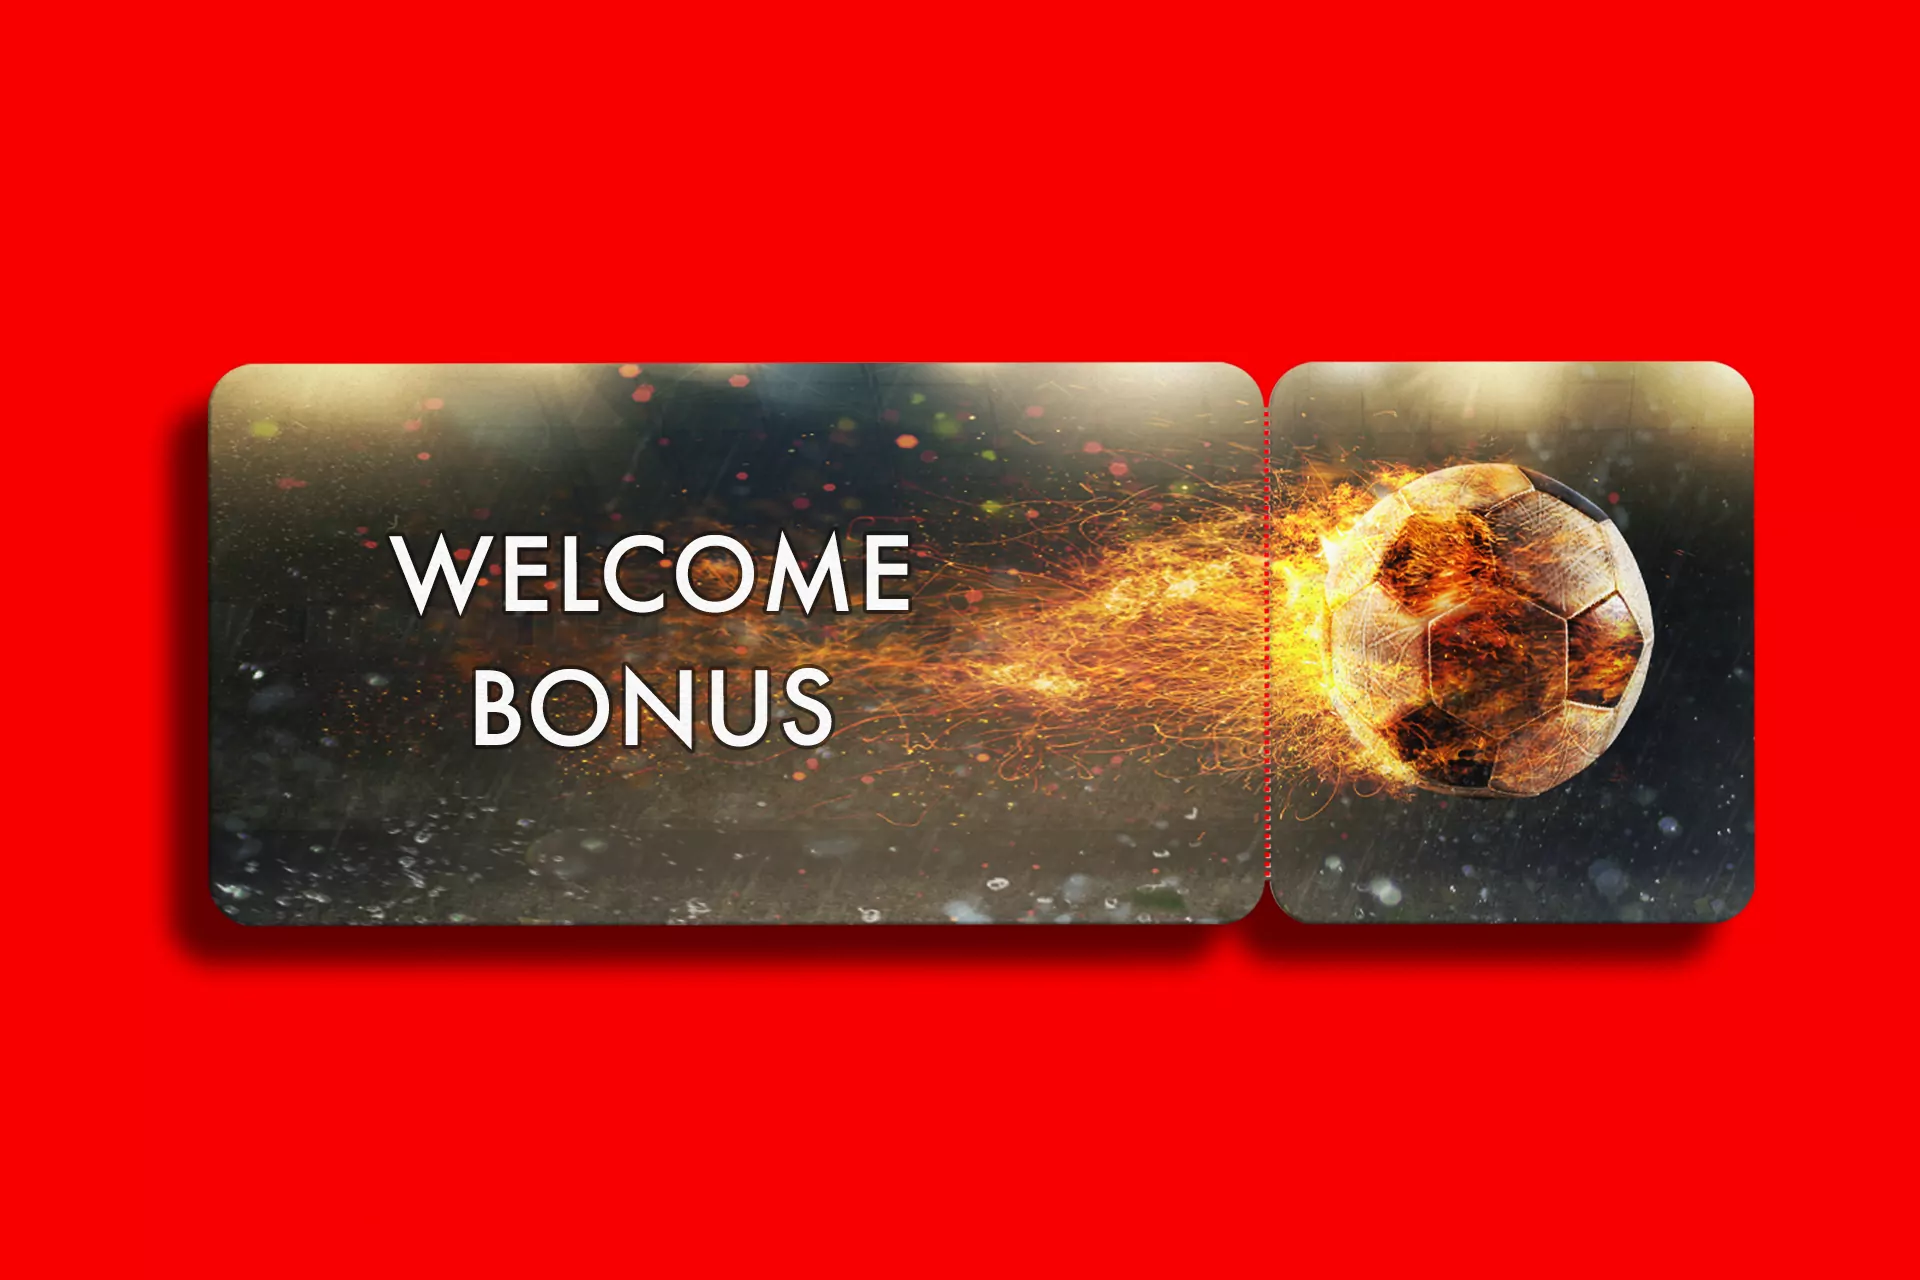 New users can count on a generous welcome offer from a bookmaker.